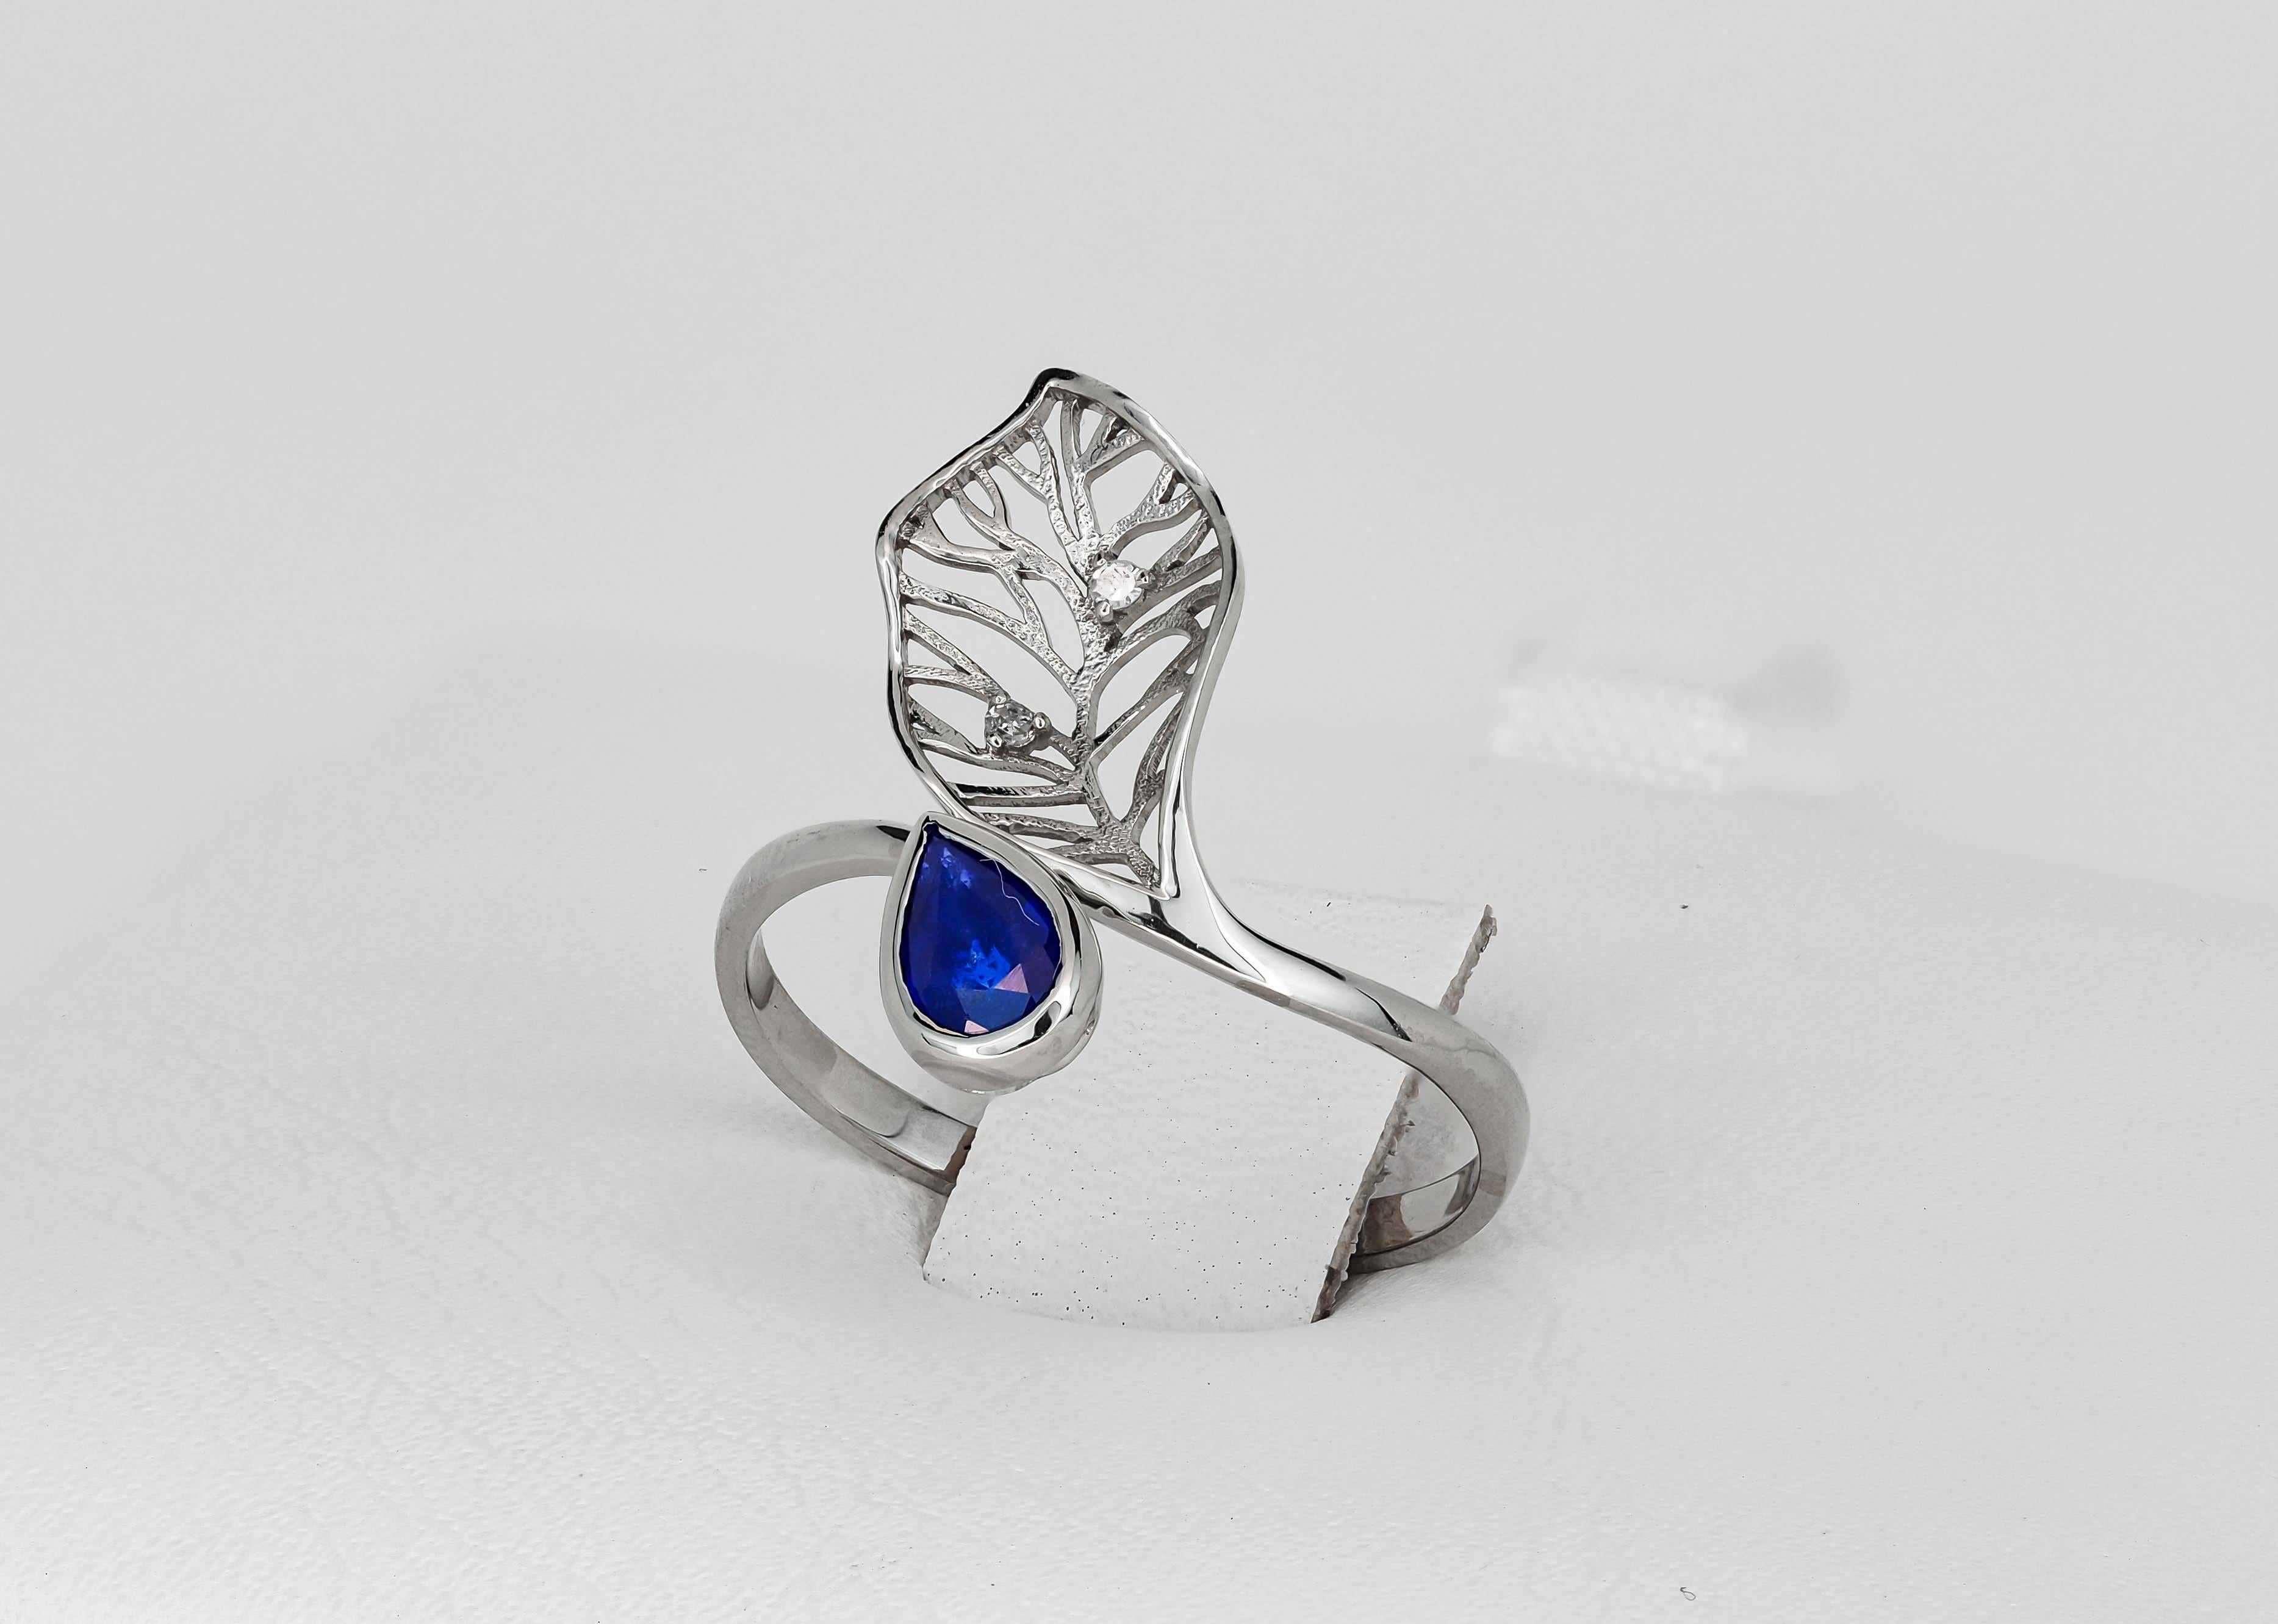 For Sale:  14 Karat Gold Ring with Sapphire and Diamonds. Floral Design Ring with Sapphire 6